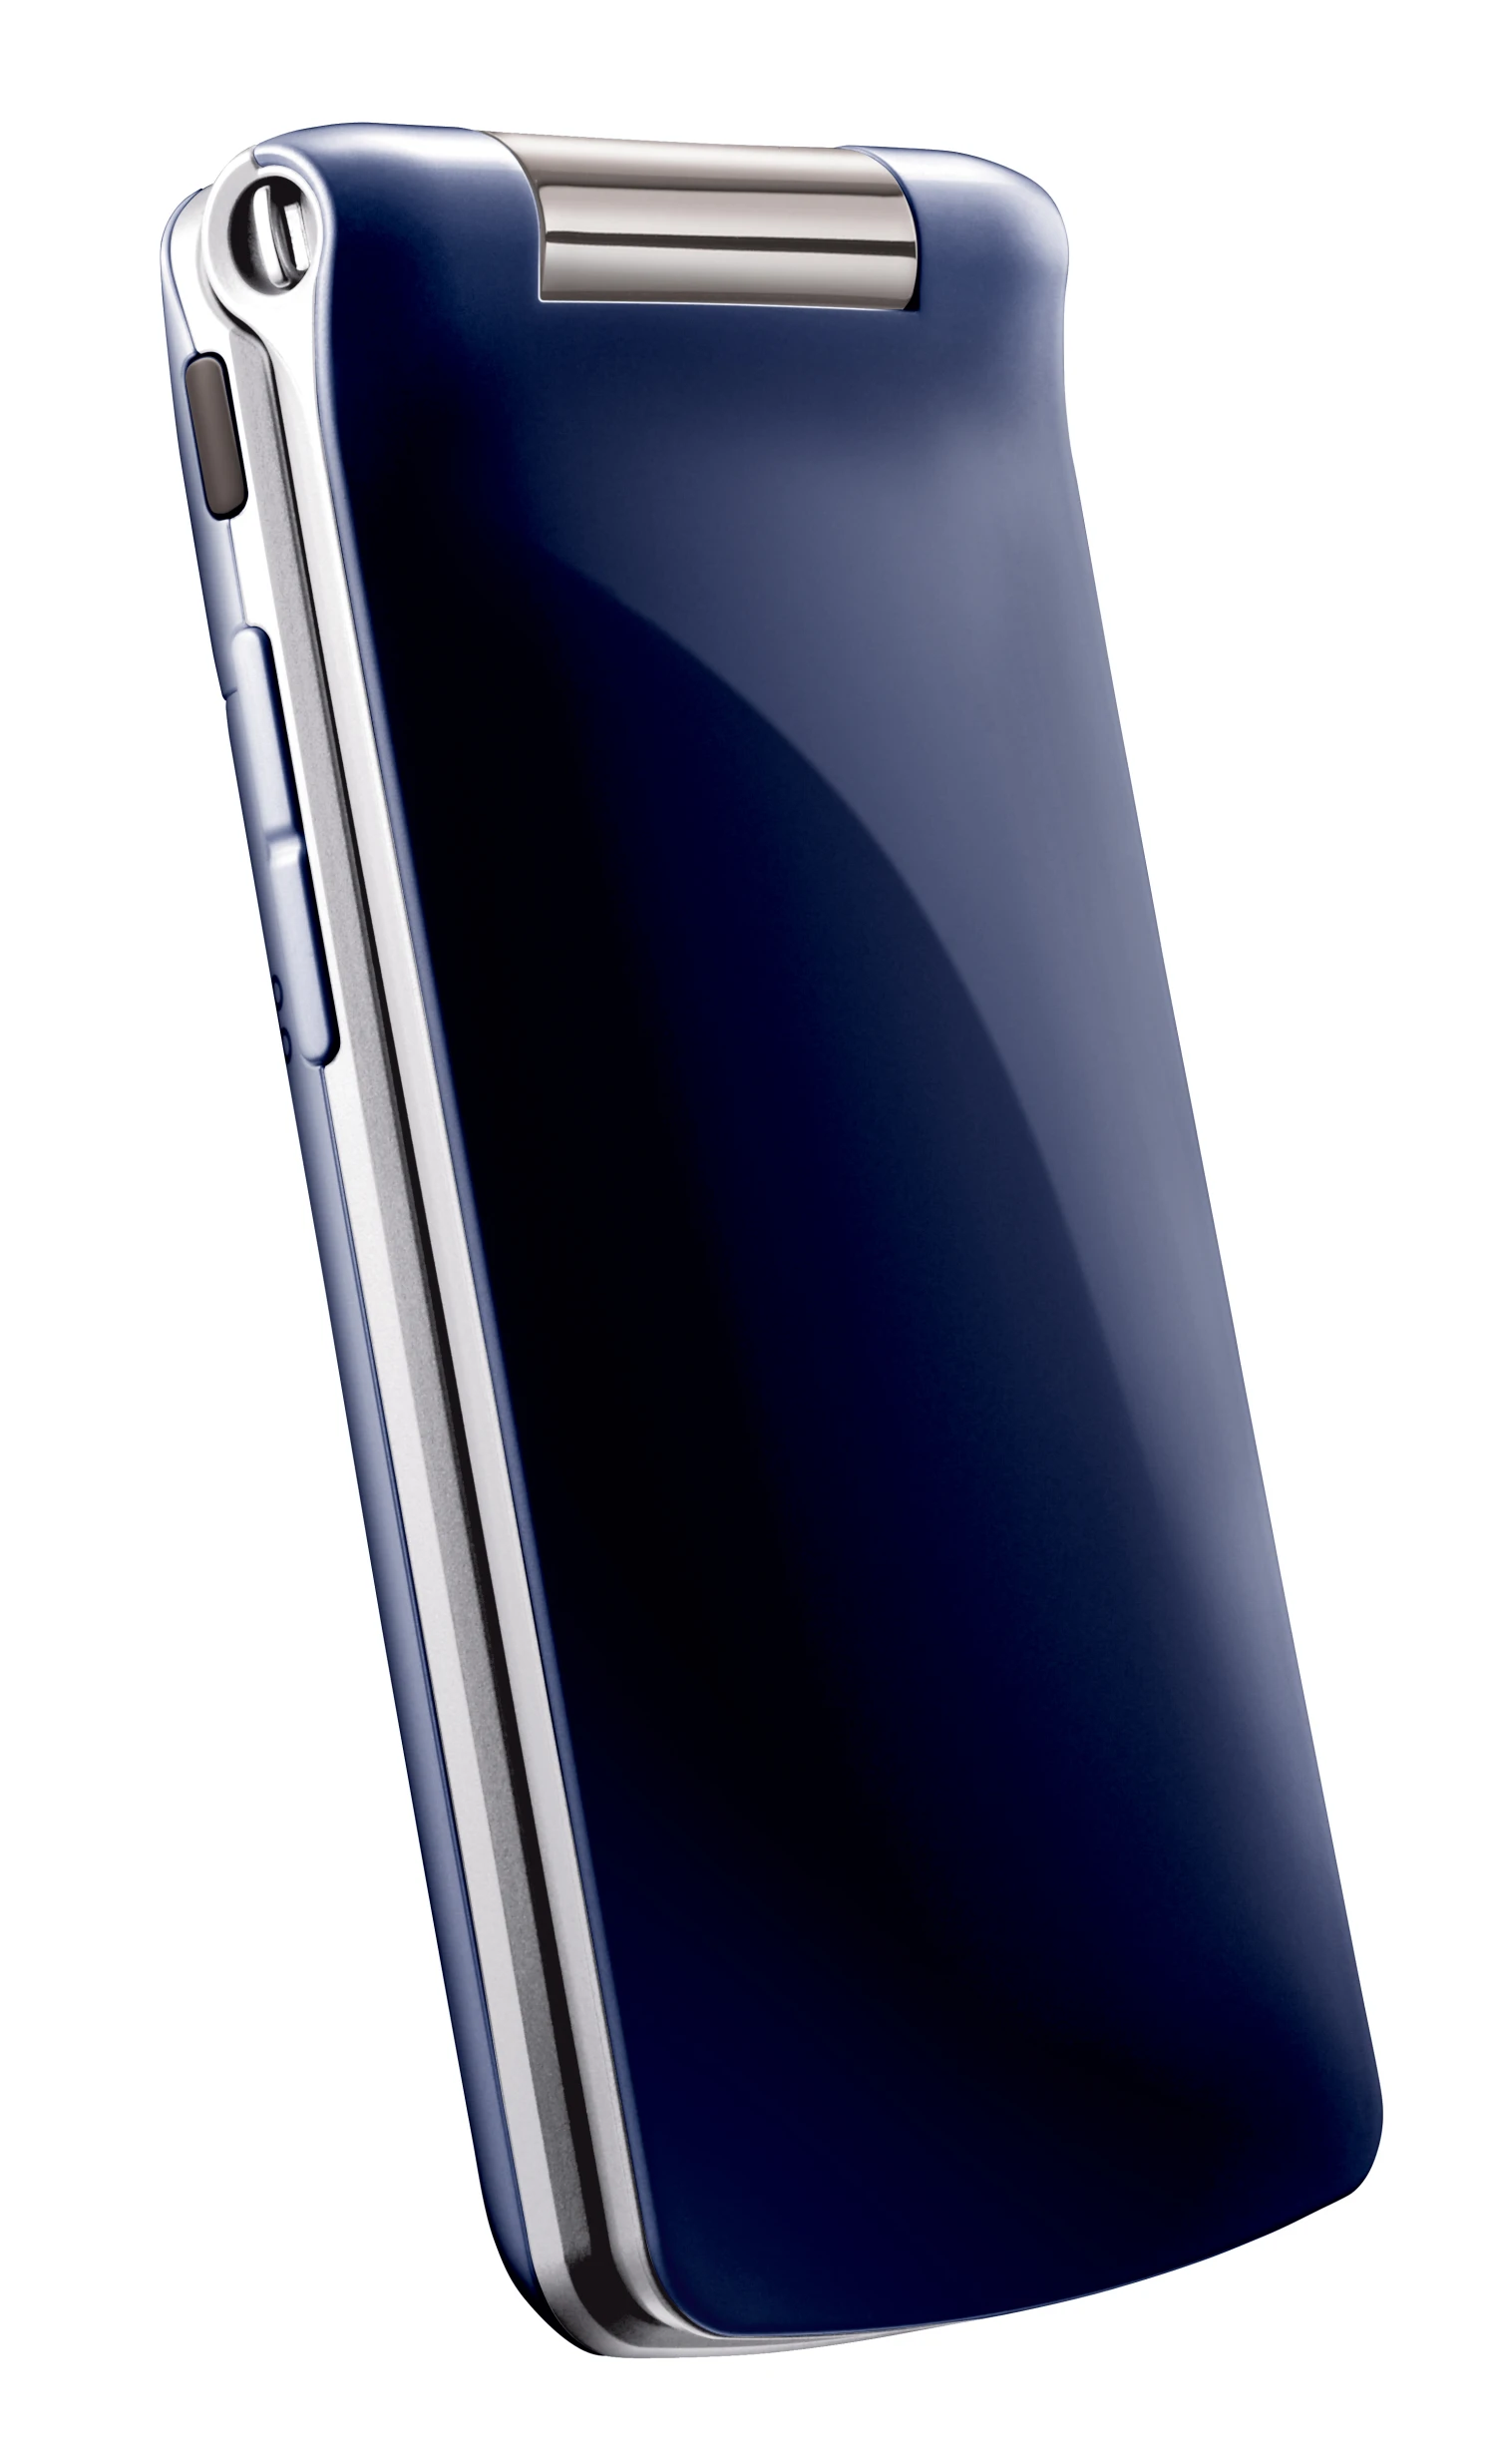 the back side of a white and blue cell phone